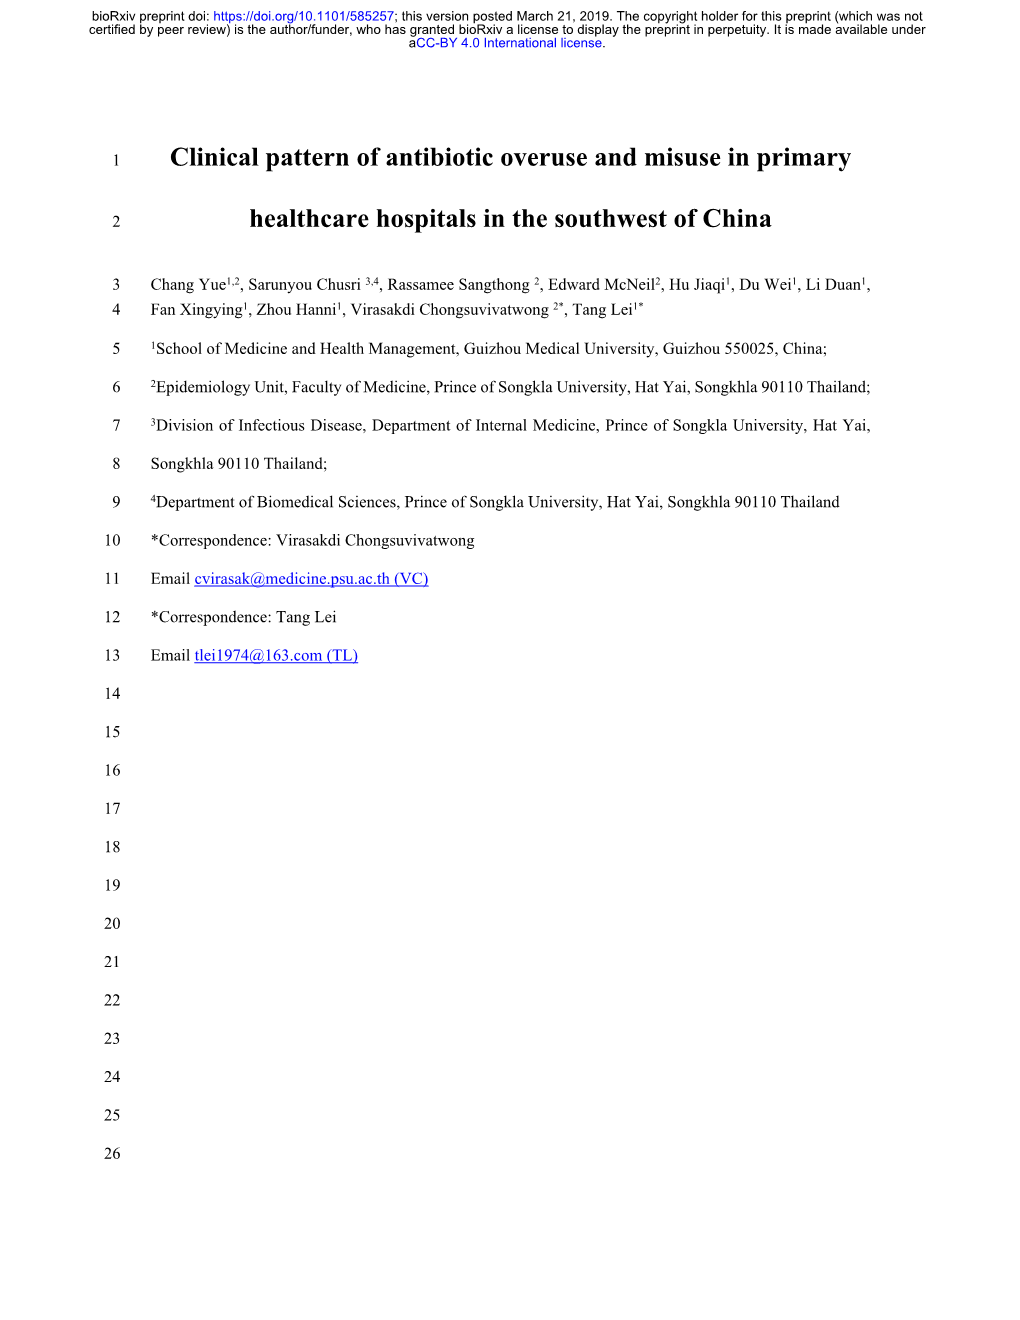 Clinical Pattern of Antibiotic Overuse and Misuse in Primary Healthcare